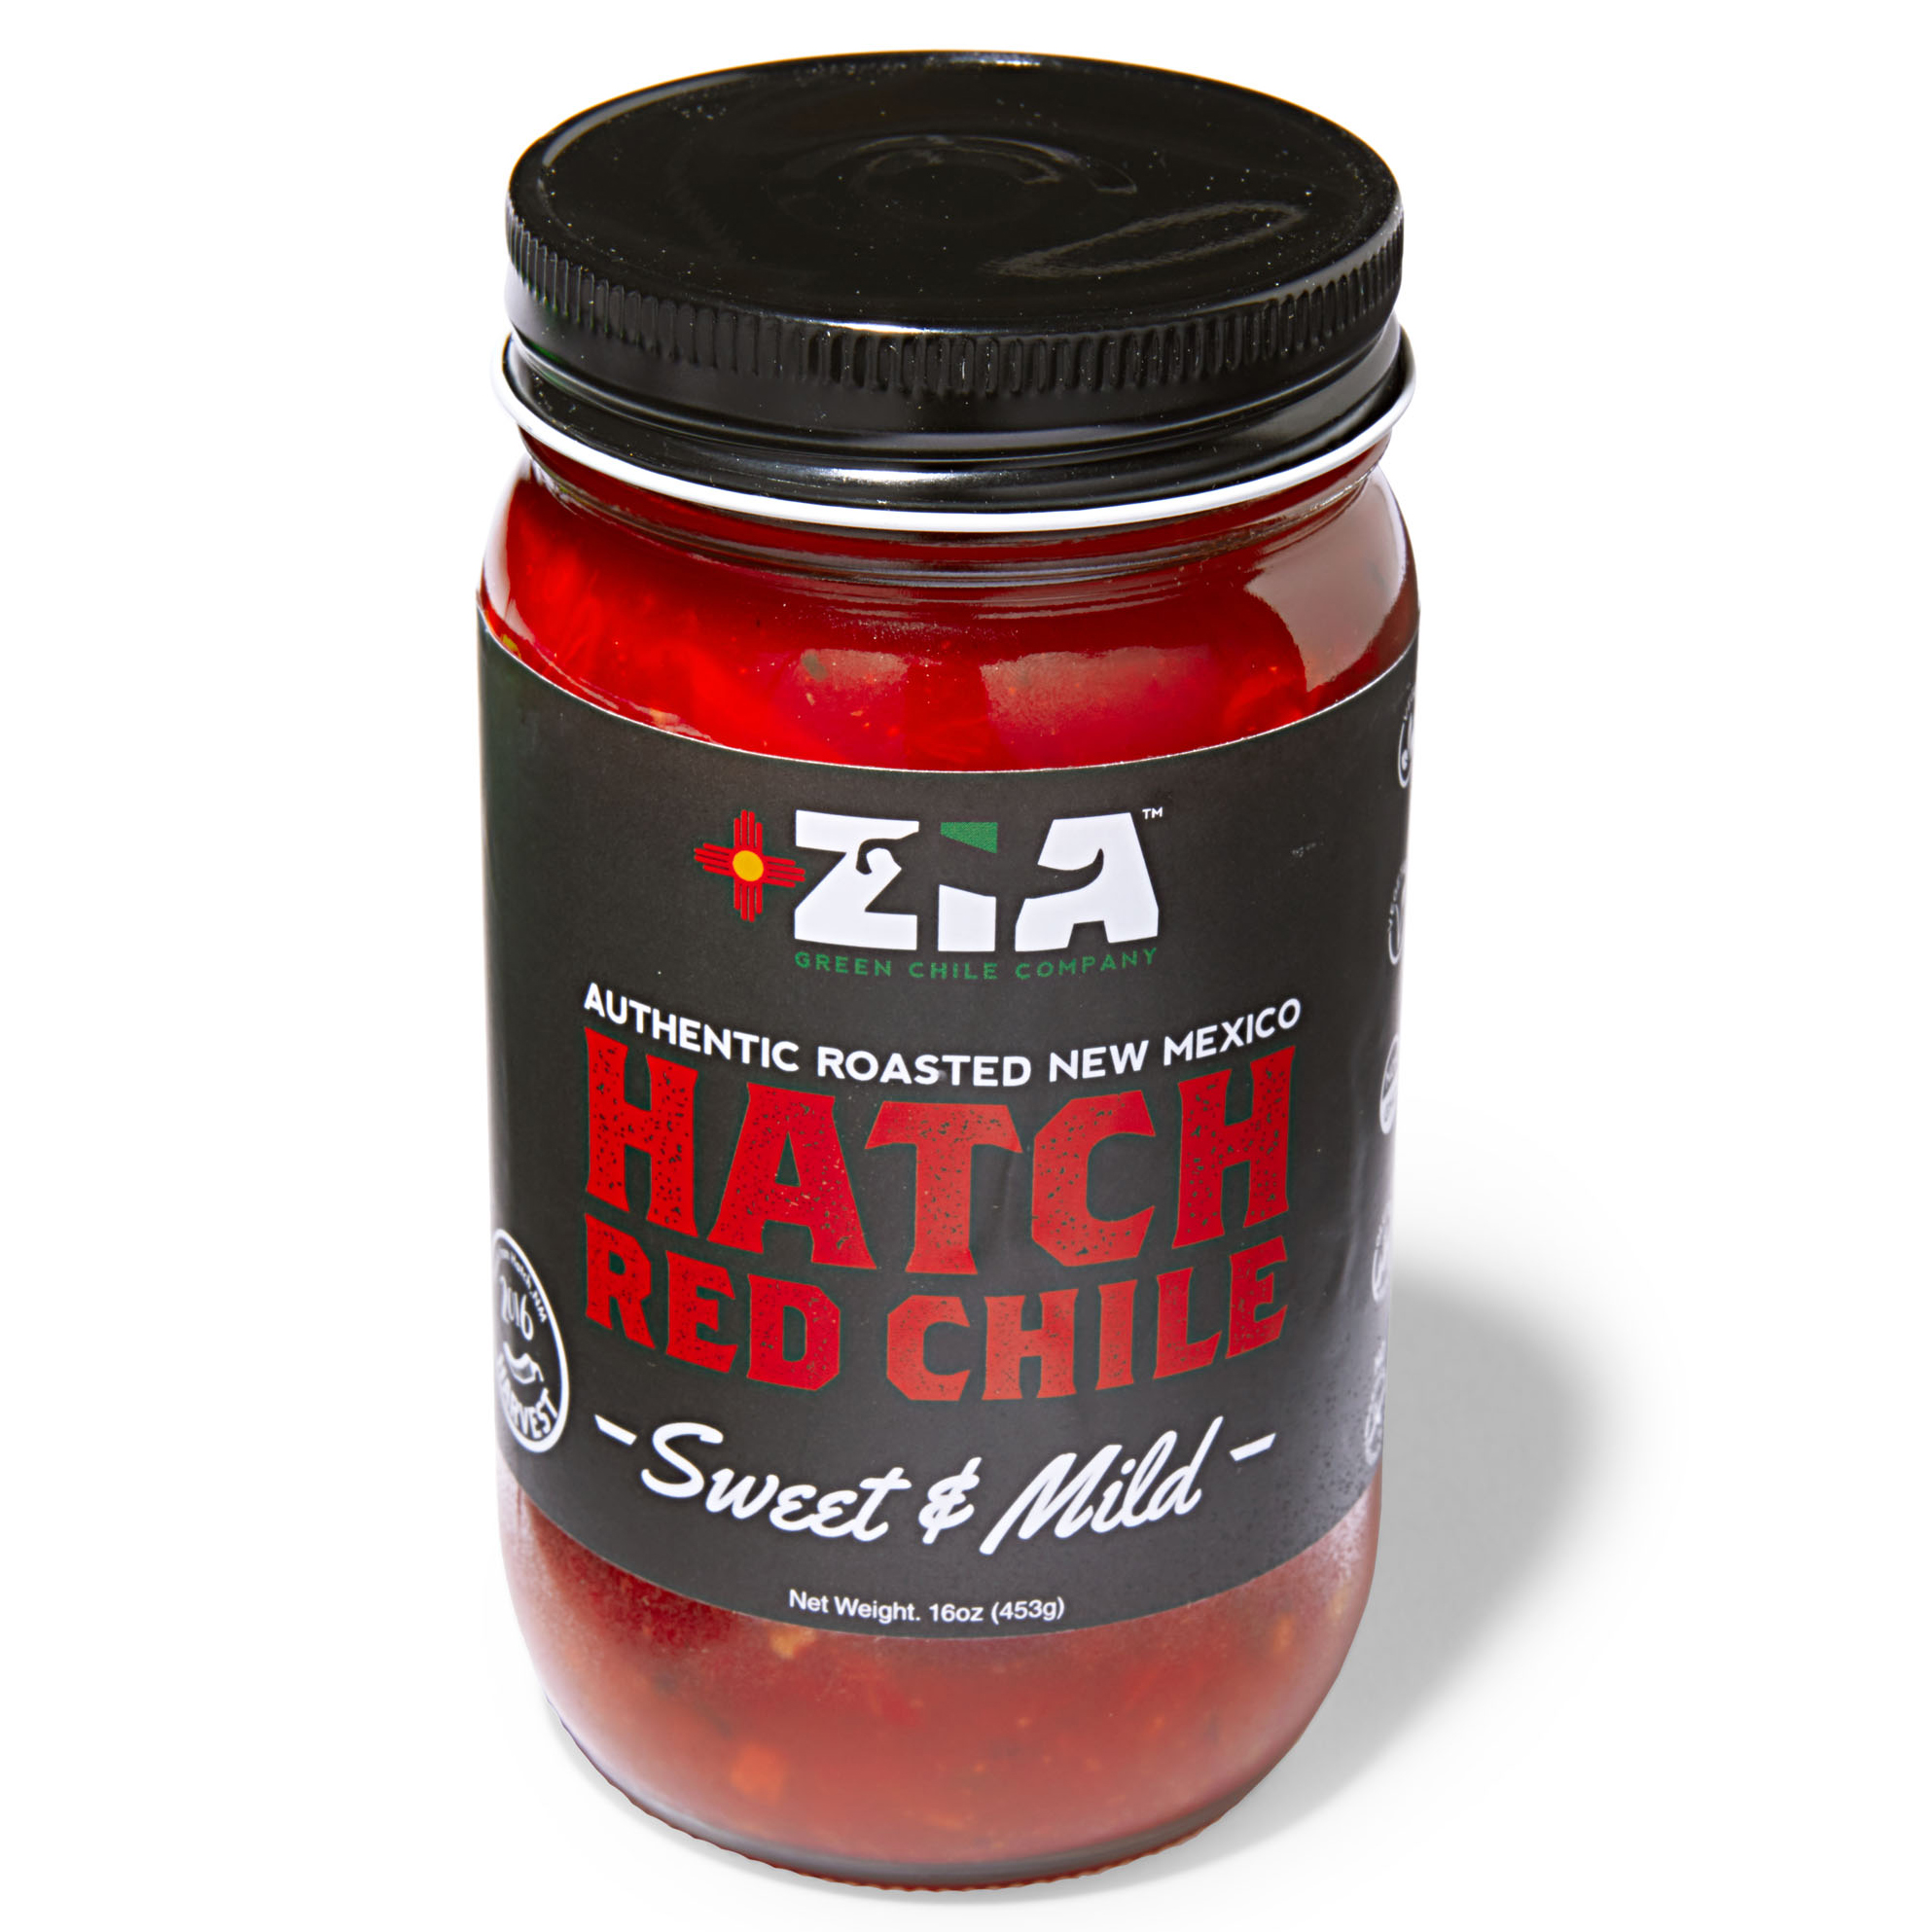 Hatch red chile sauce